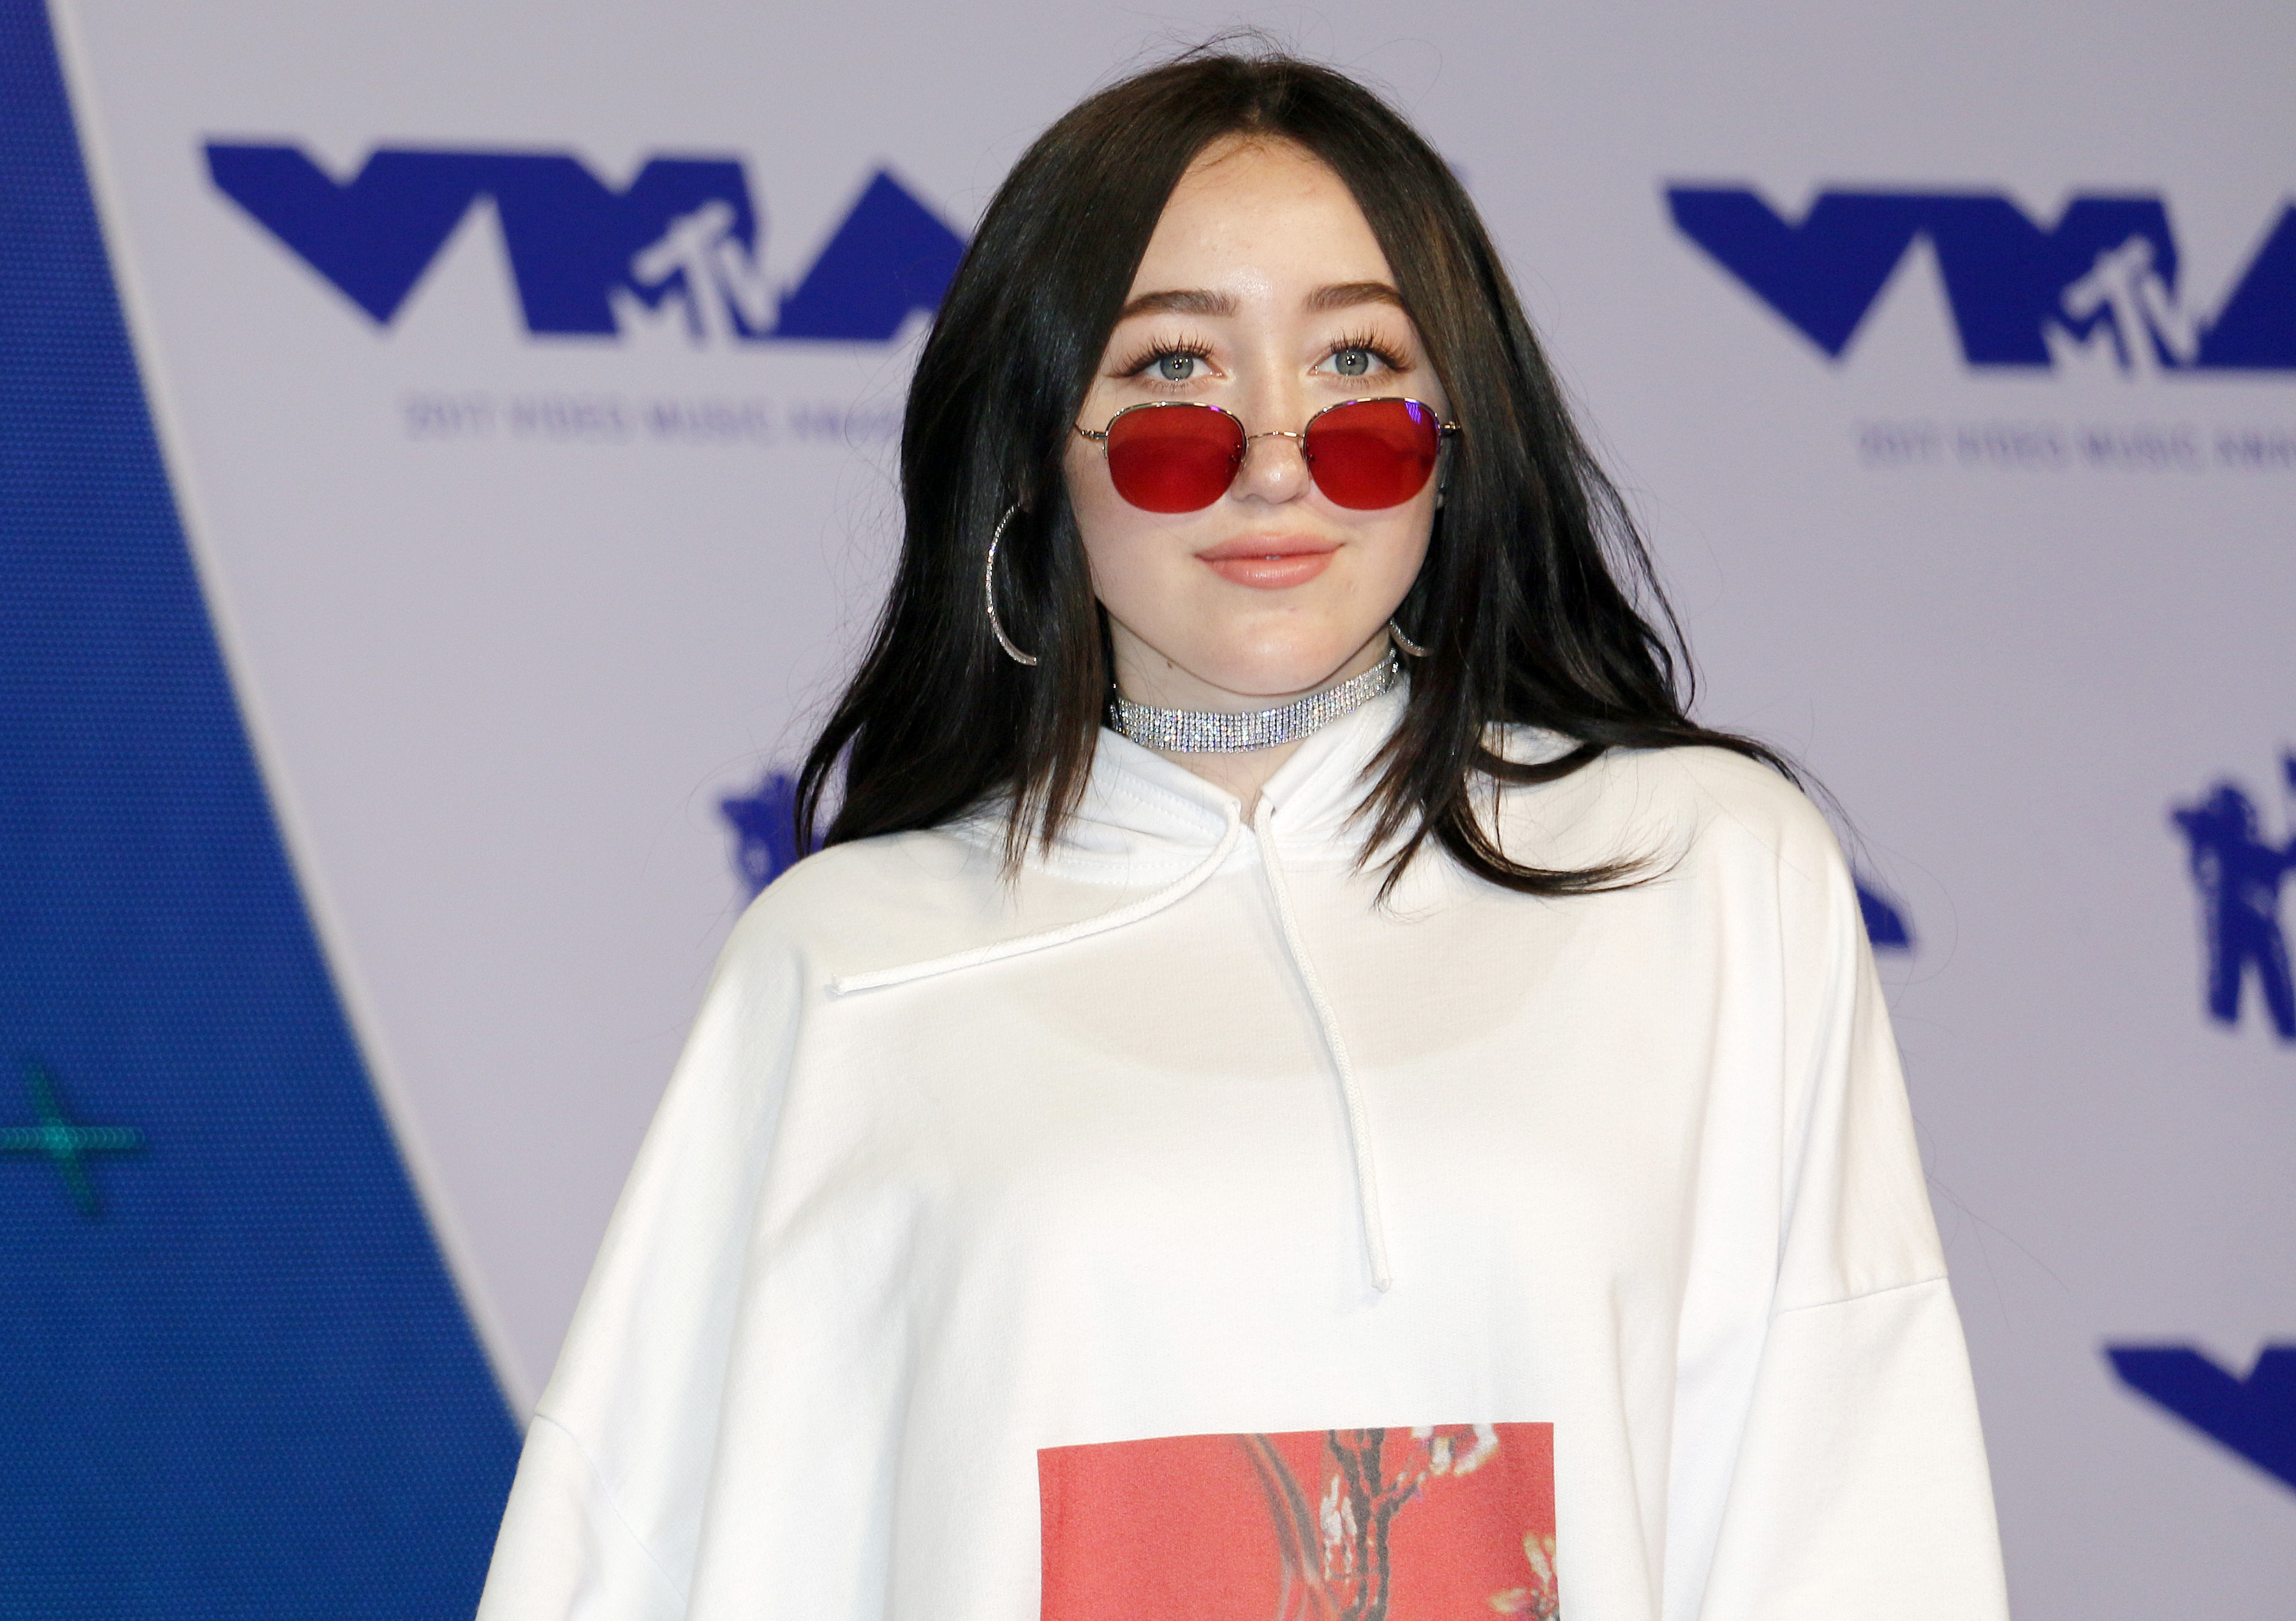 Source Claims Noah Cyrus Used to Date Her Mom's New Husband | As Mamas Uncut previously reported, rumors that members of Miley Cyrus’s family weren’t getting along came to light when Miley failed to mention several family members, including her father, Billy Ray Cyrus and sister Noah Cyrus, in her Grammys acceptance speech.